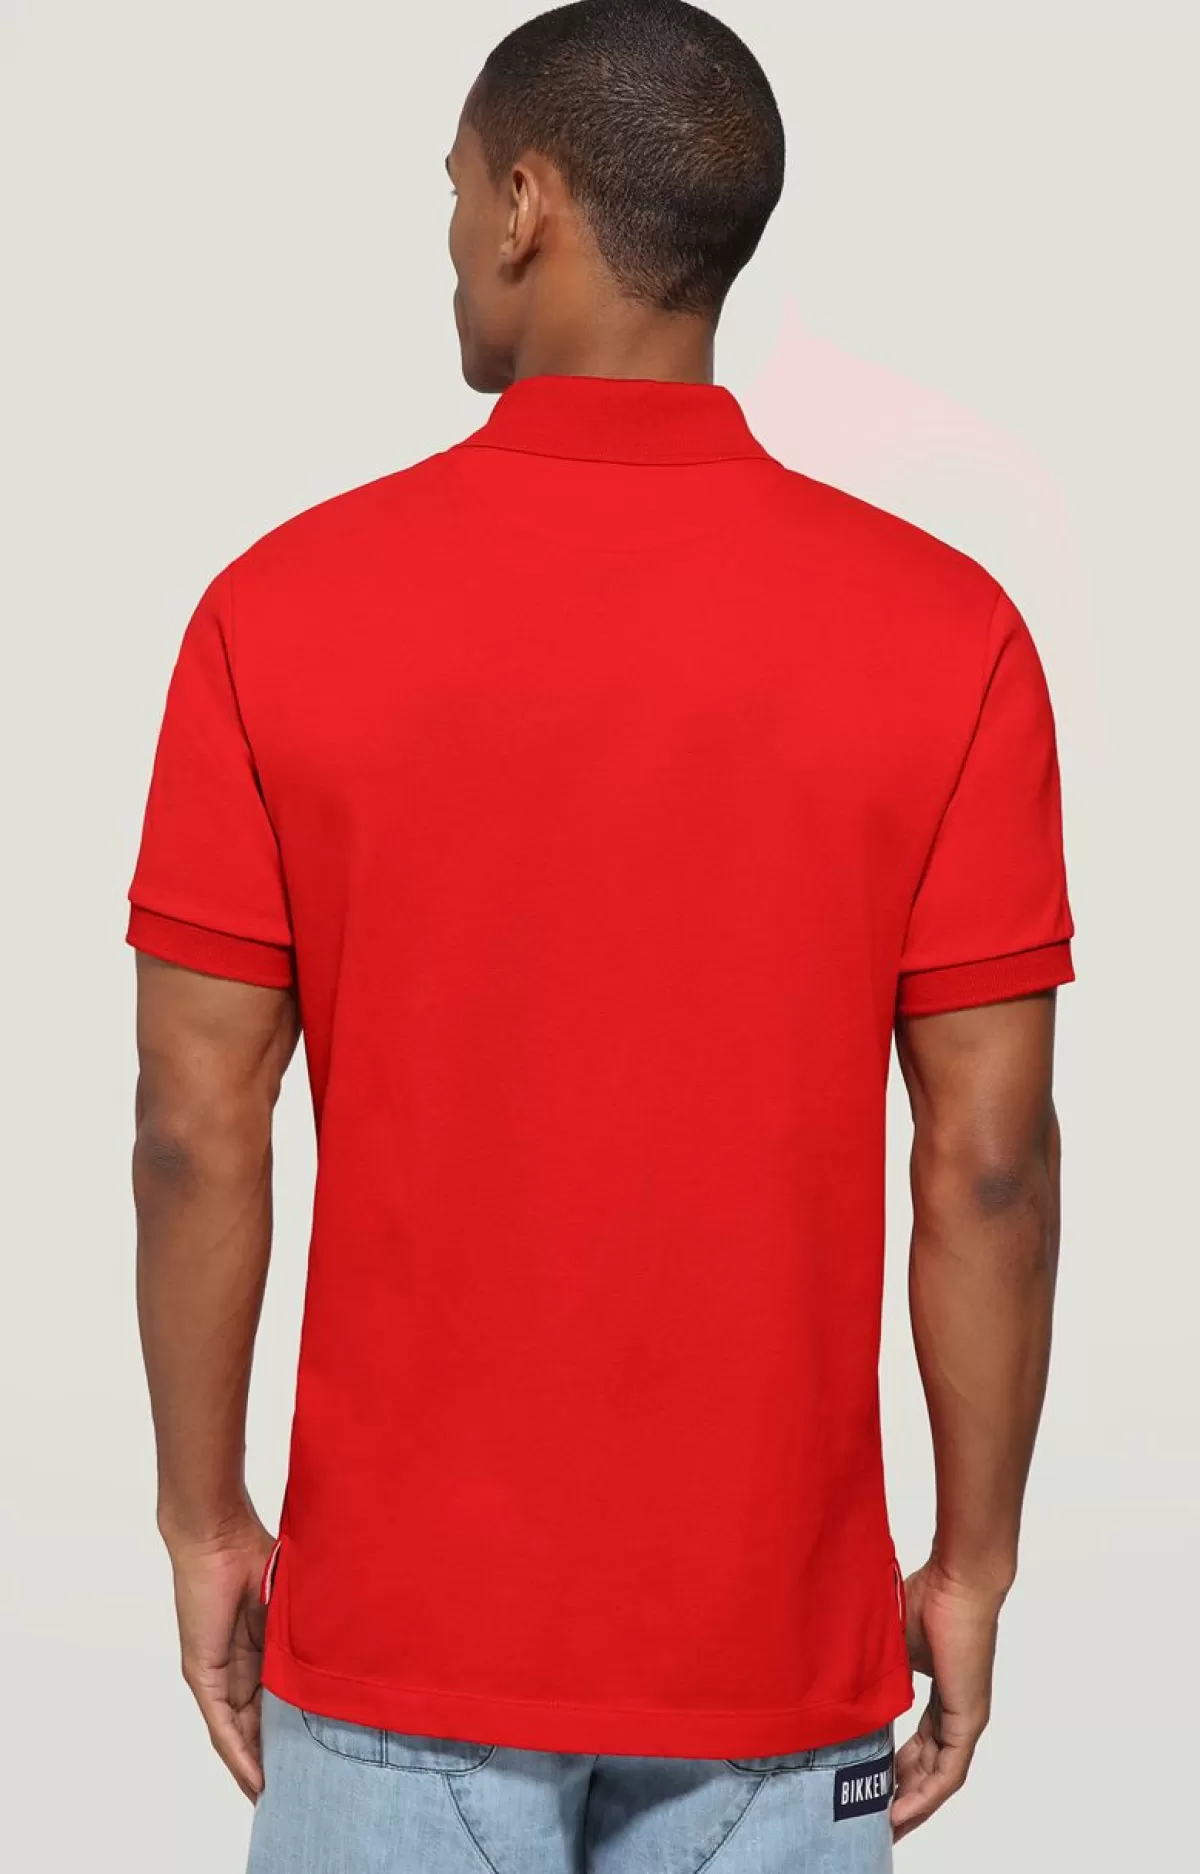 Bikkembergs Men'S Embroide Polo Shirt Red Best Sale